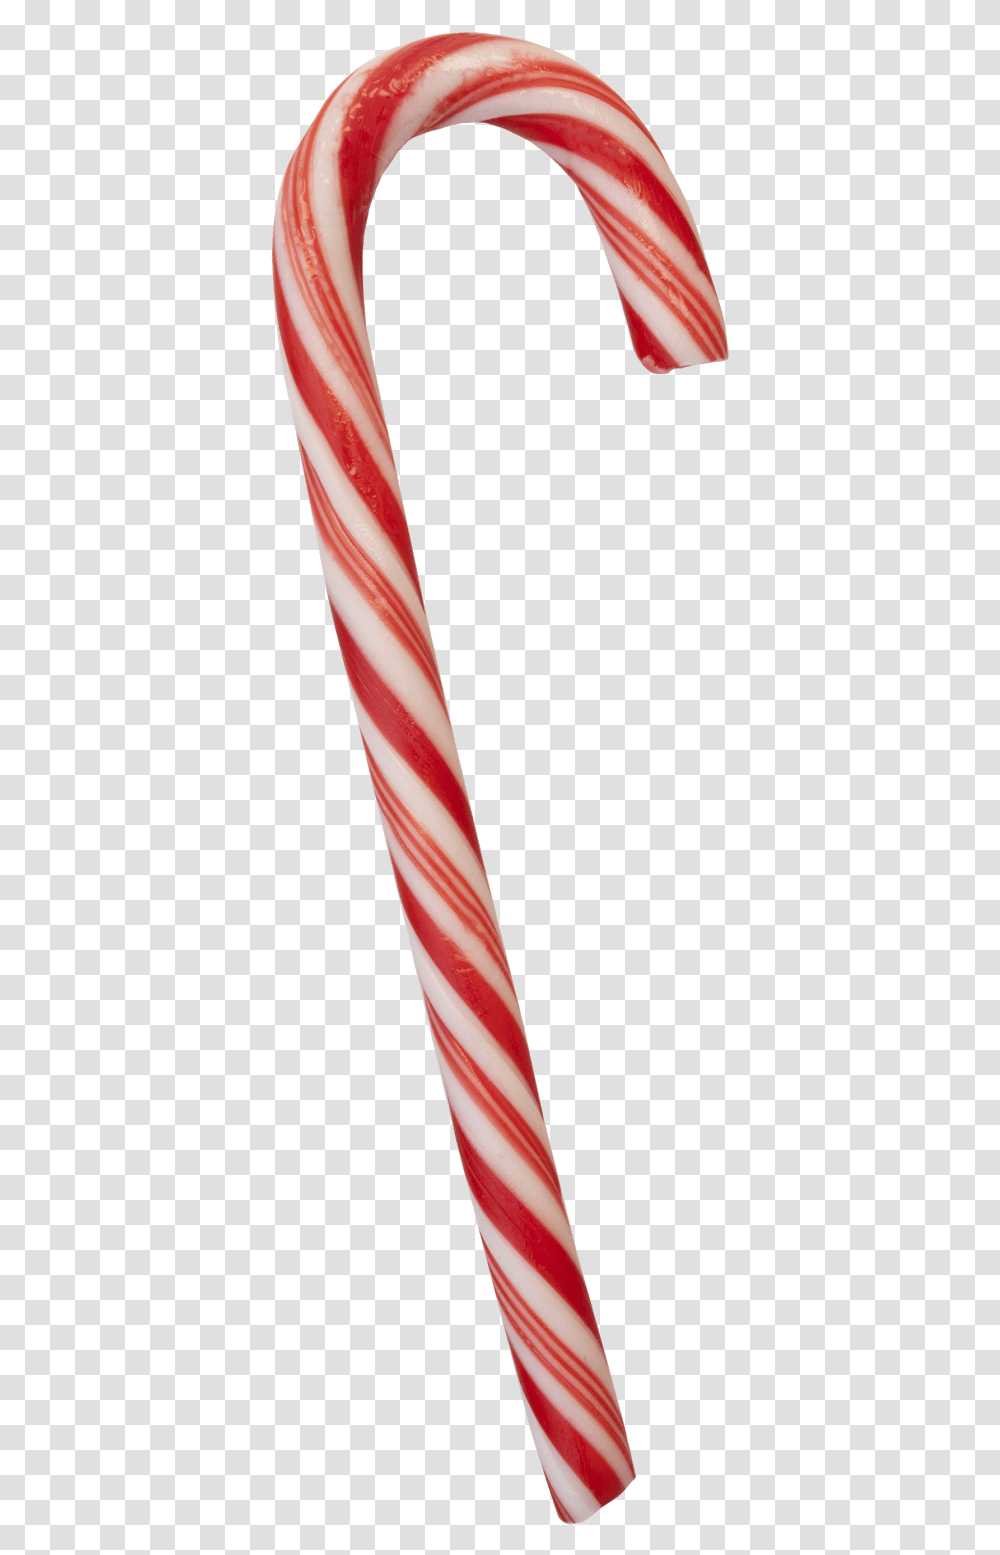 Candy Cane Stick Background Candy Cane, Sweets, Food, Confectionery, Lollipop Transparent Png